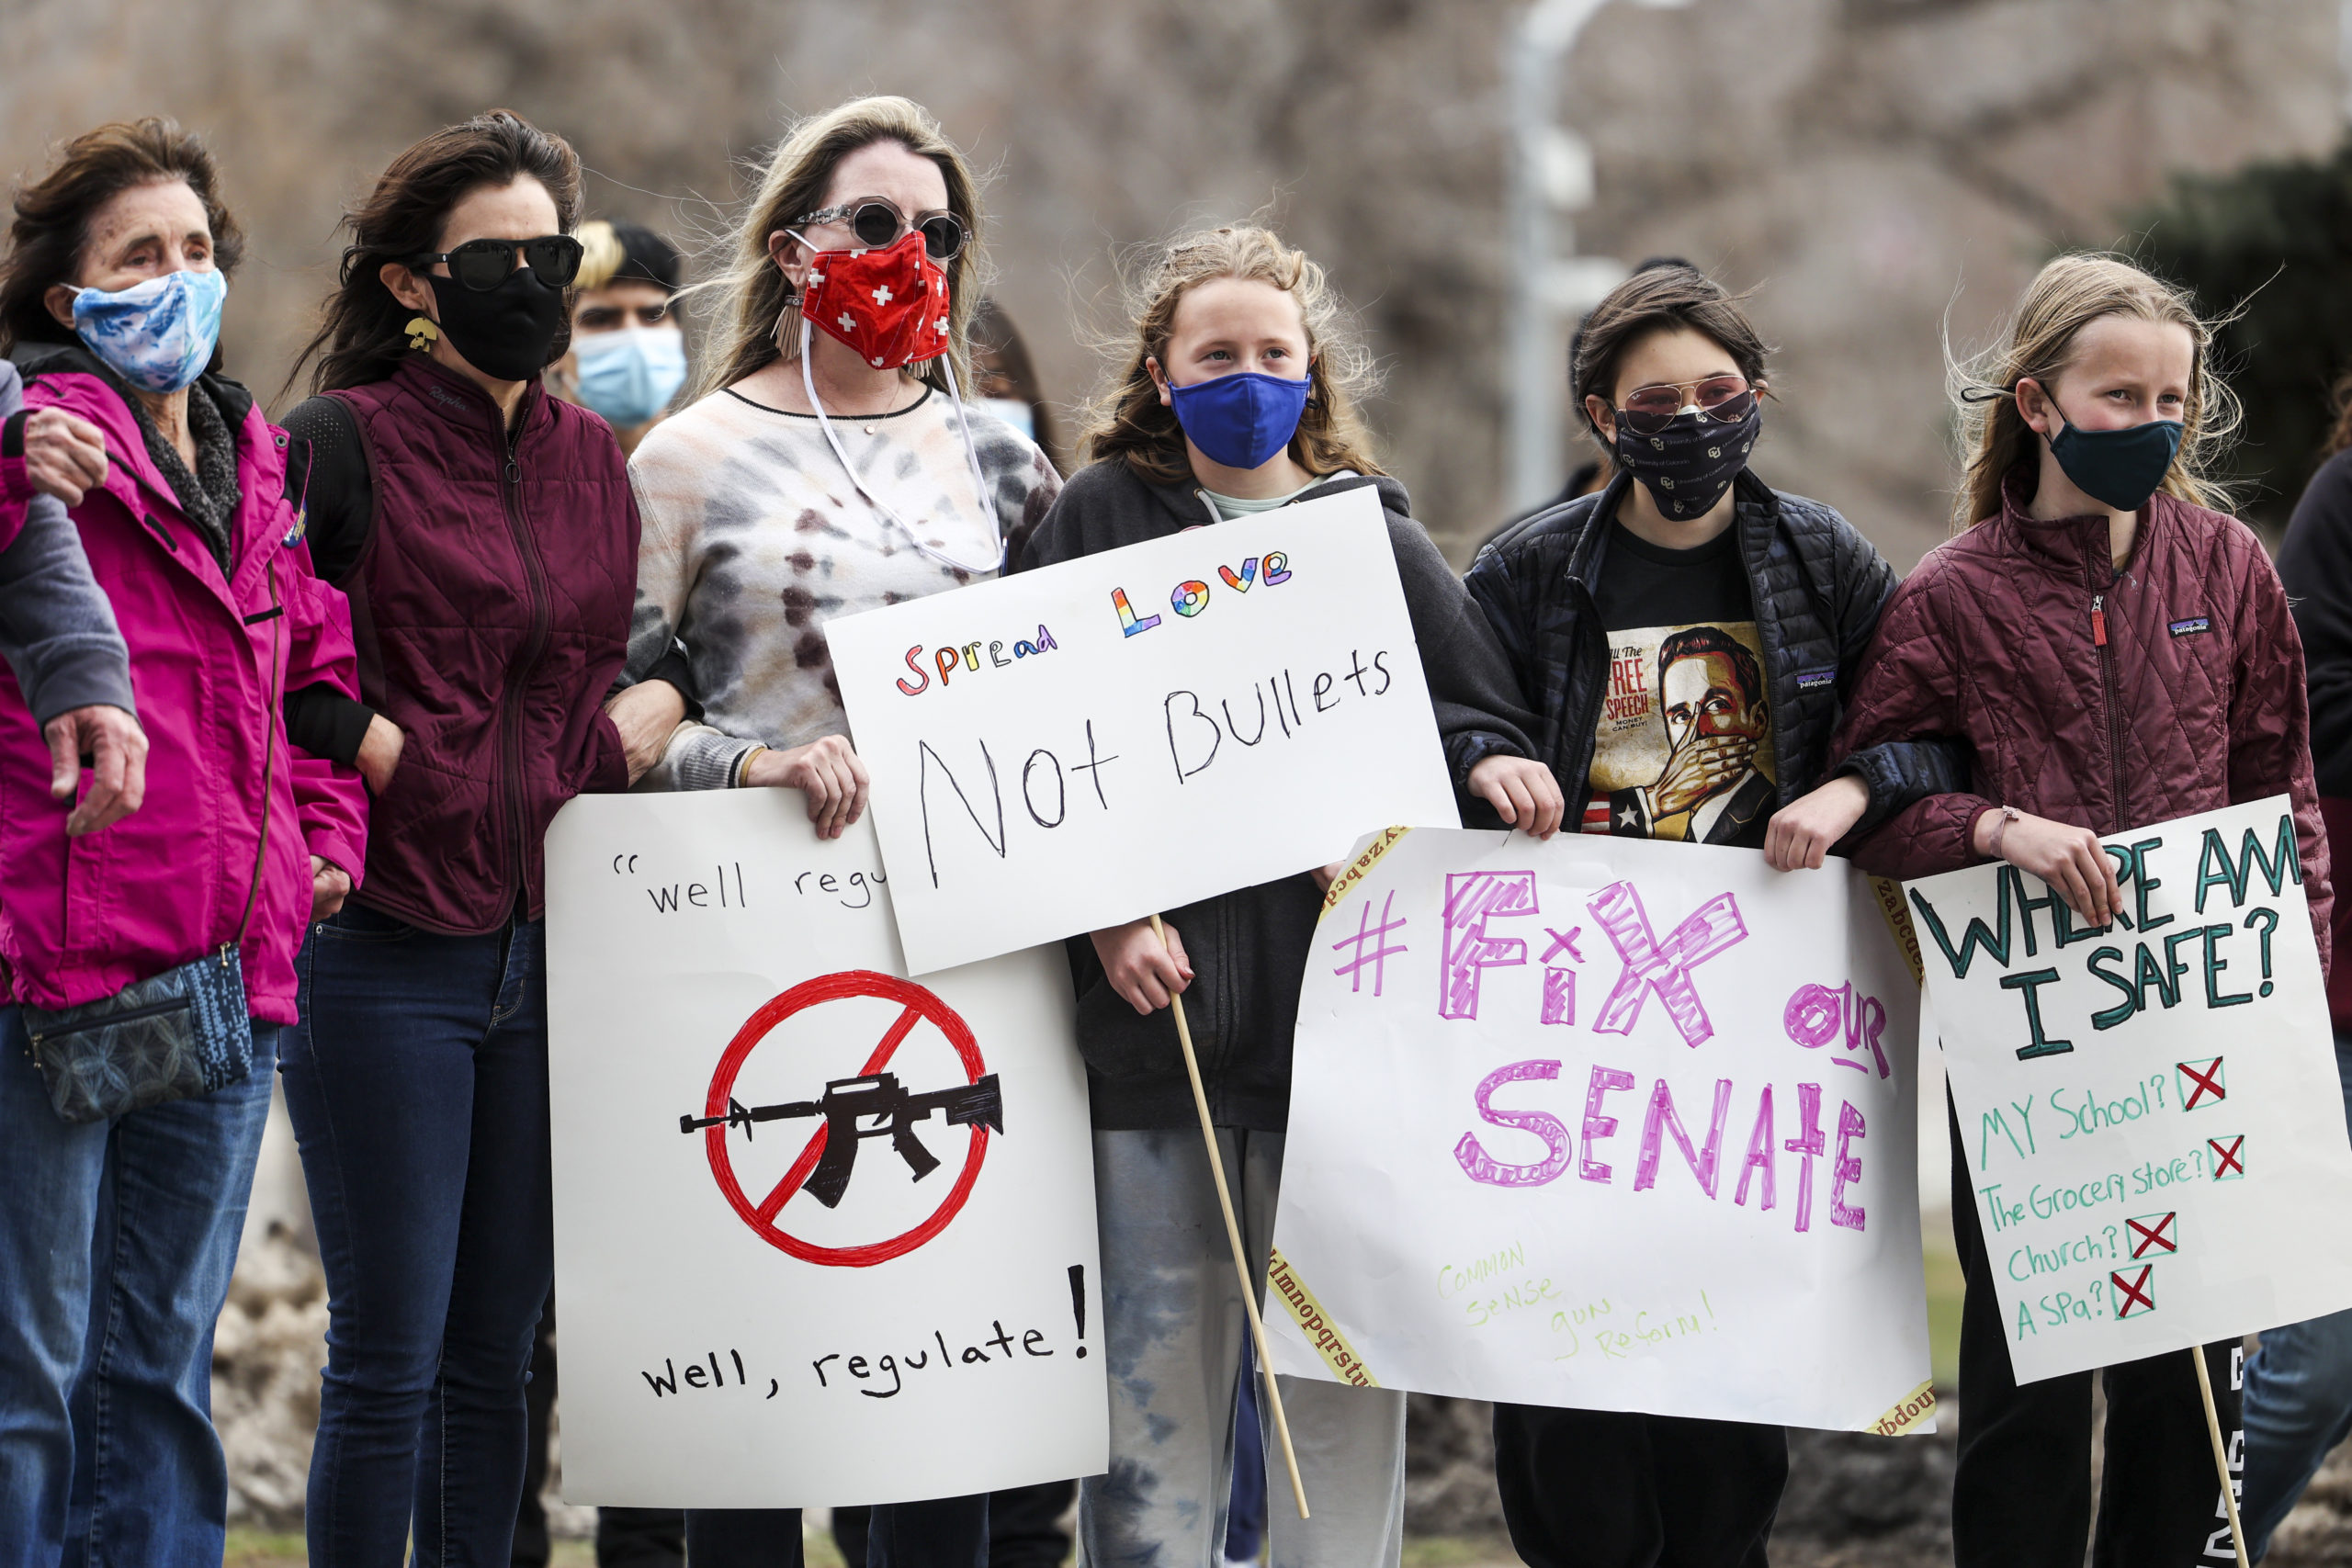 Activists rally at Colorado capitol for increased gun control measures. (Photo by Michael Ciaglo/Getty Images)